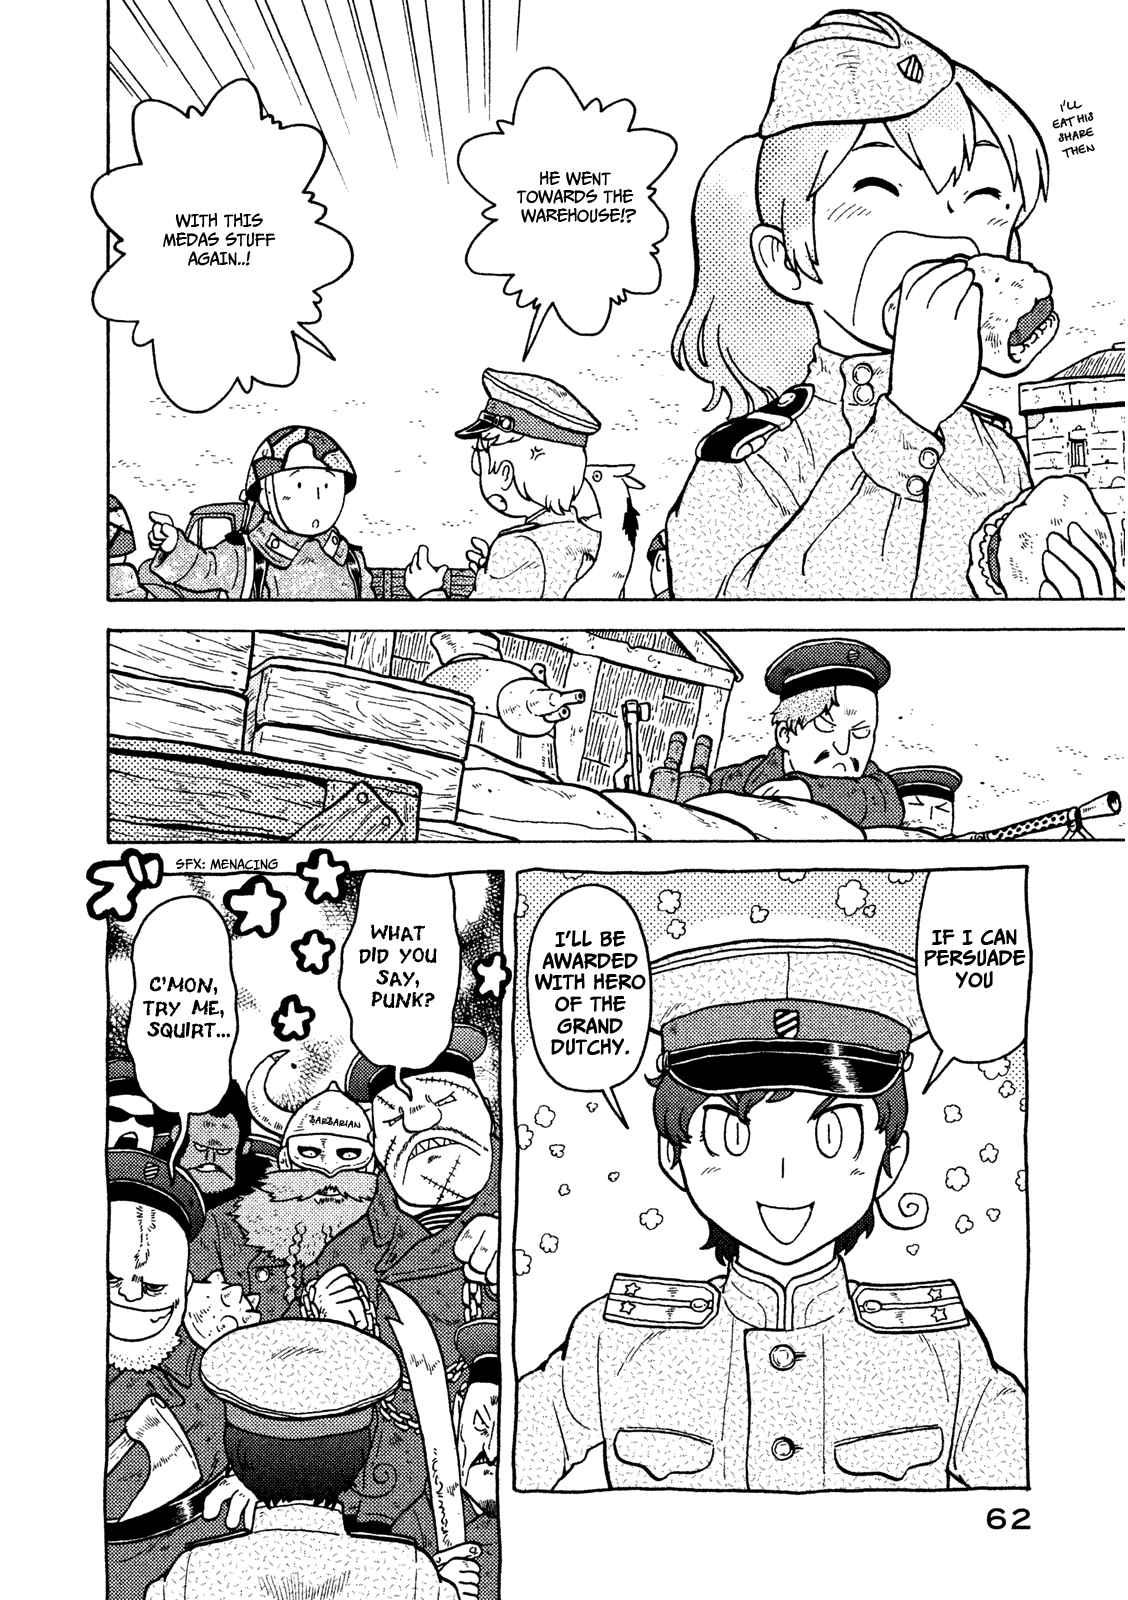 Guns and Stamps Vol. 2 Ch. 10 Don't speak of it